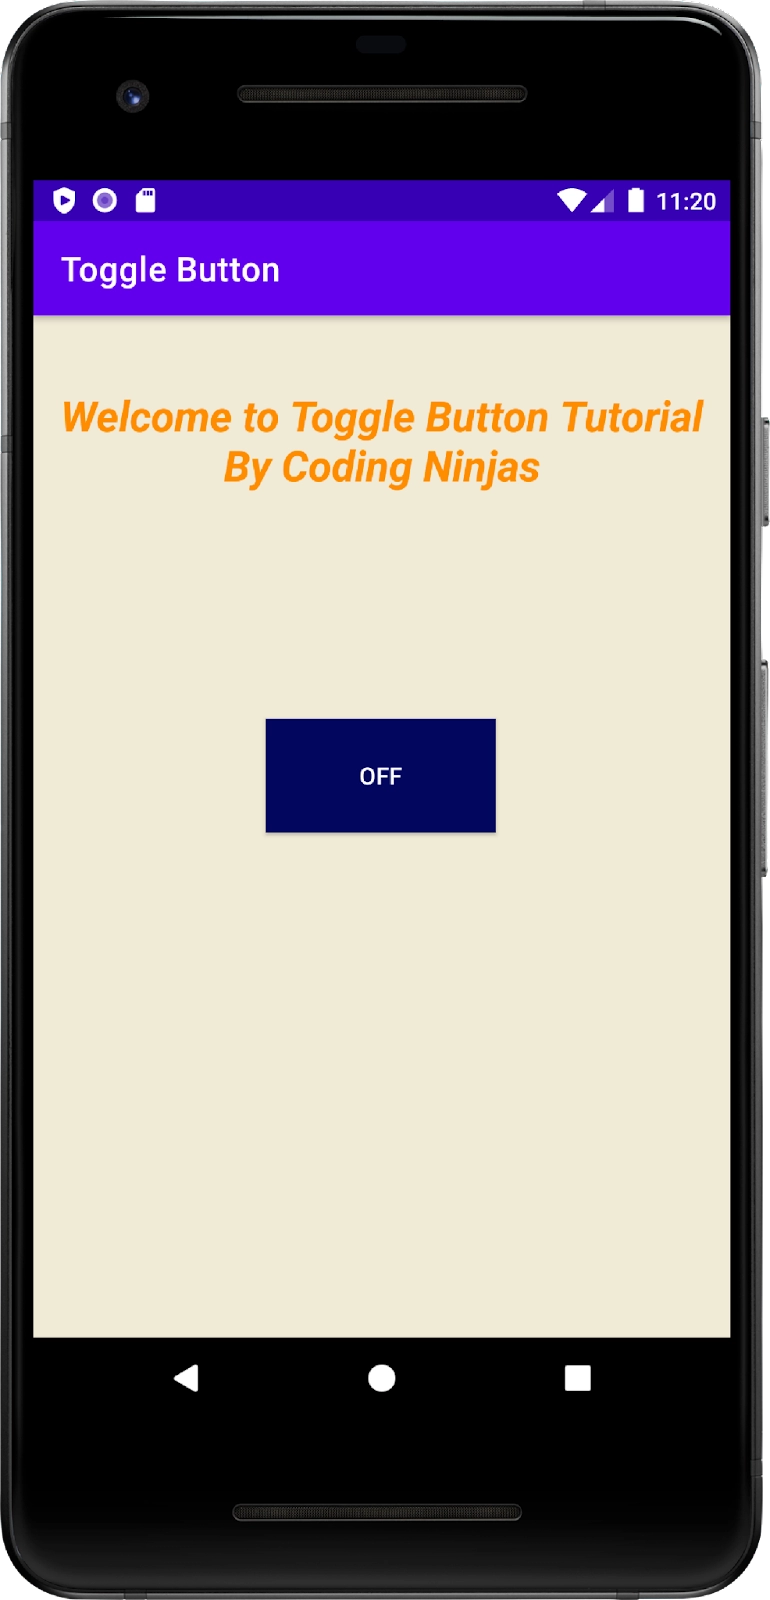 How to add Toggle Button in an Android Application - GeeksforGeeks